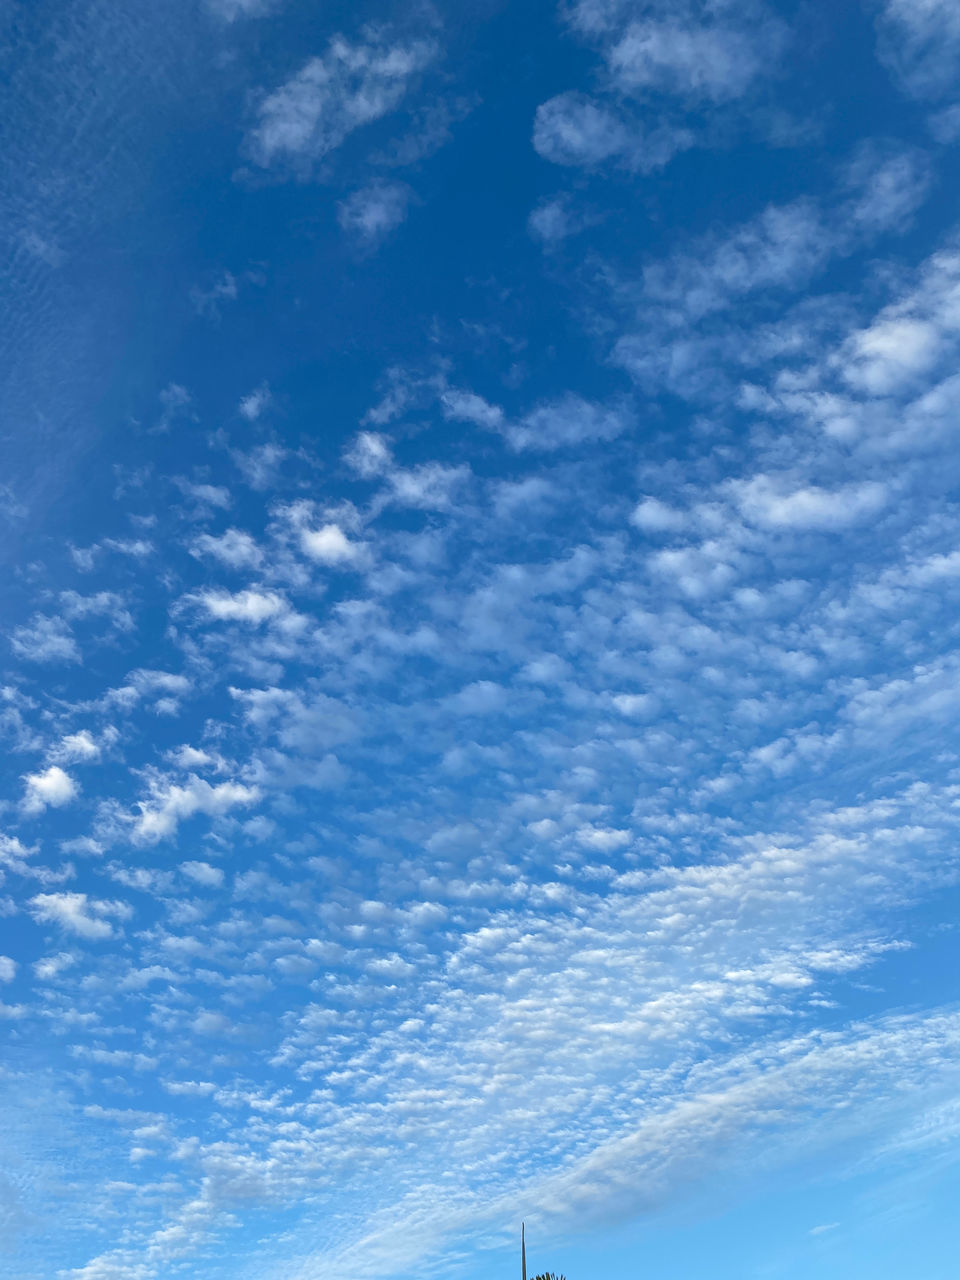 sky, cloud, blue, horizon, nature, low angle view, no people, beauty in nature, technology, electricity, sunlight, environment, power generation, day, outdoors, scenics - nature, daytime, cable, cloudscape, power supply, tranquility, azure, tranquil scene